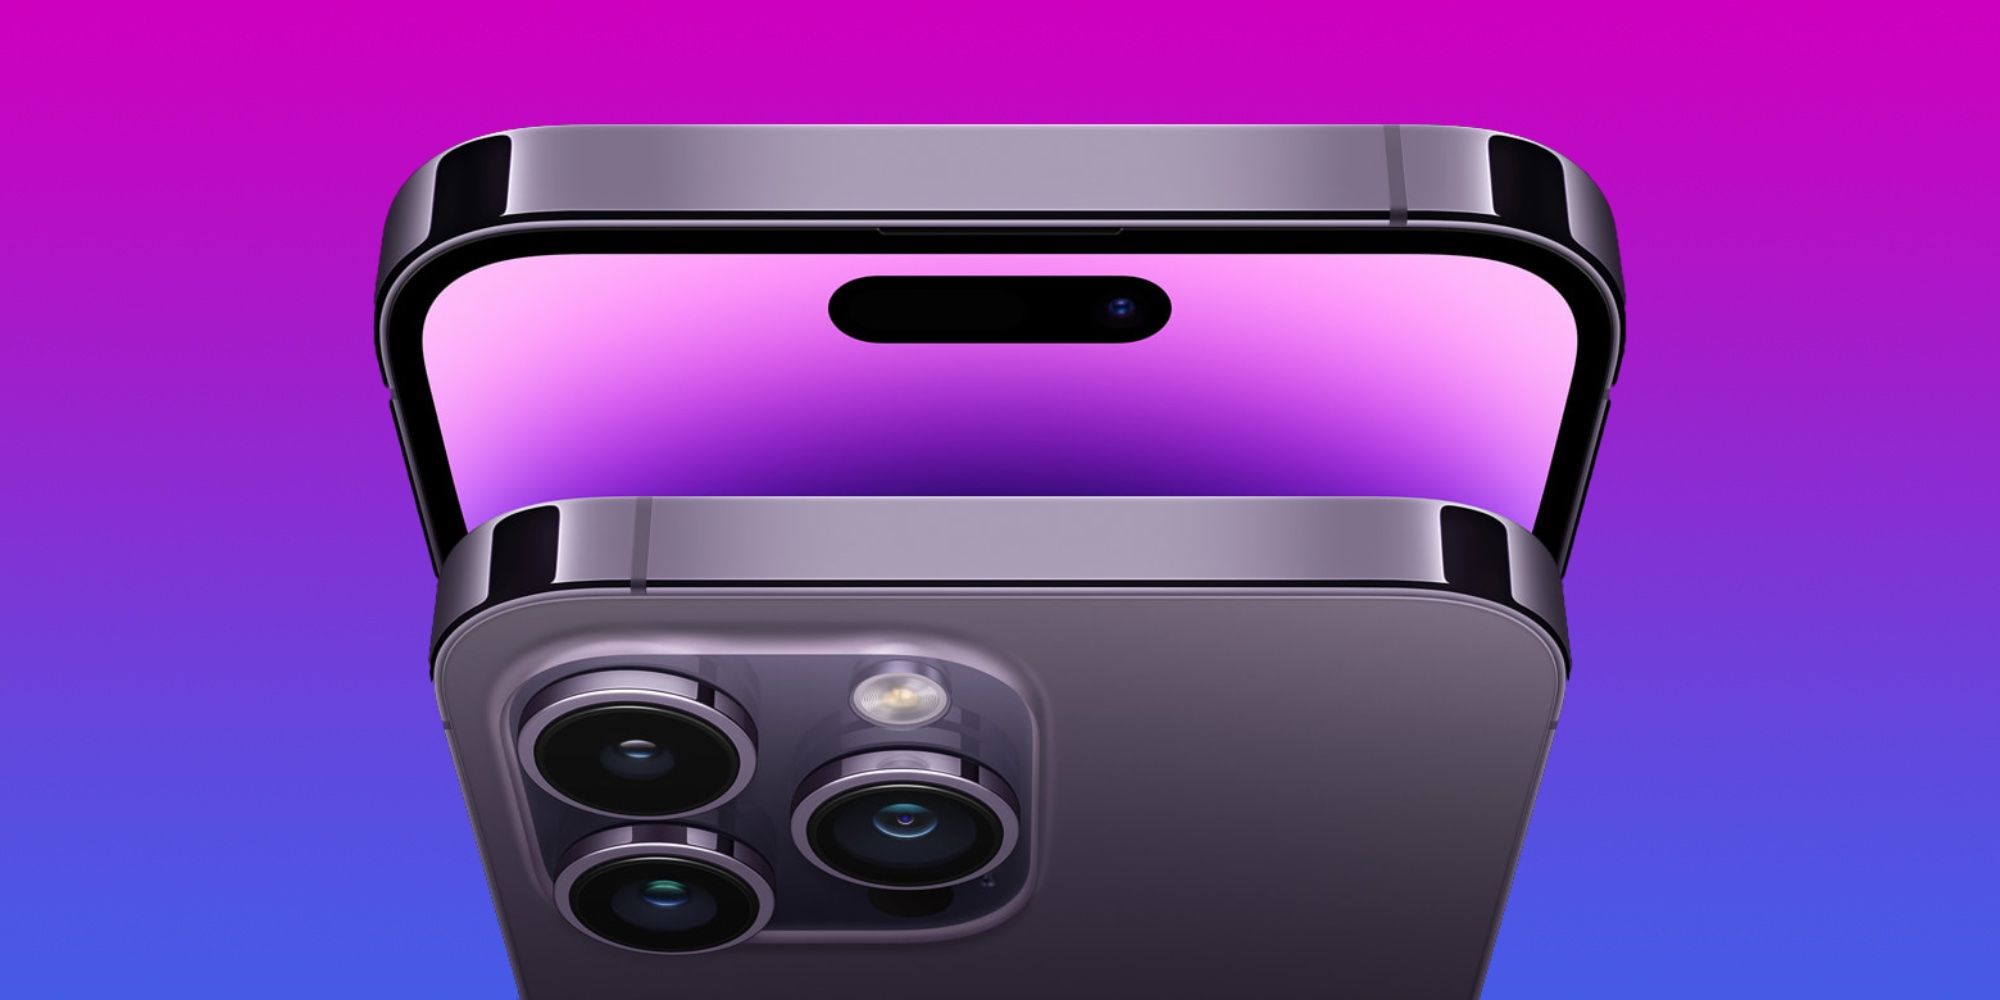 Two iPhones 14 Pro in front of a purple gradient background.